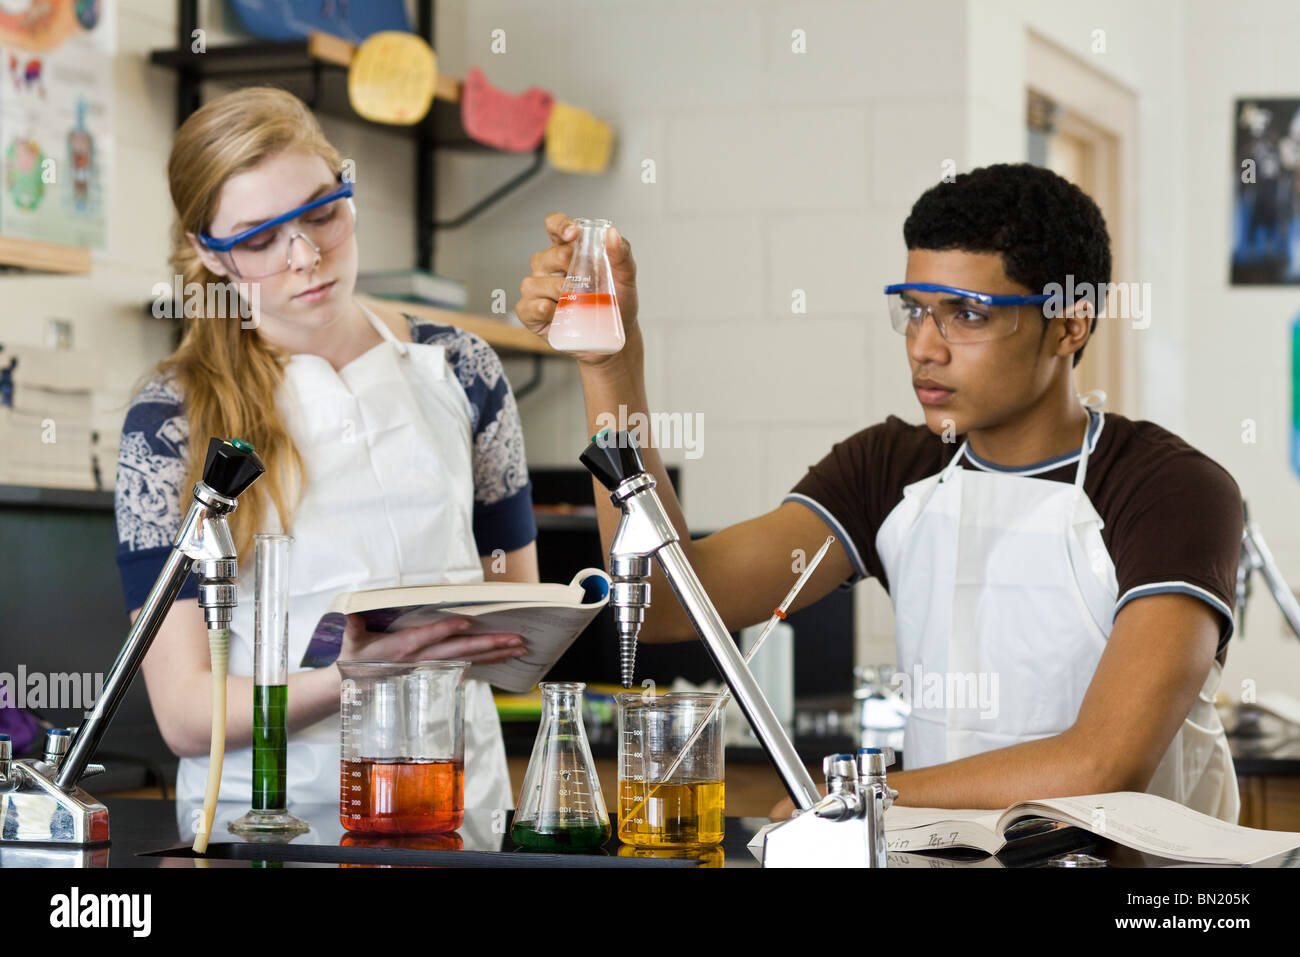 chemistry experiments in high school